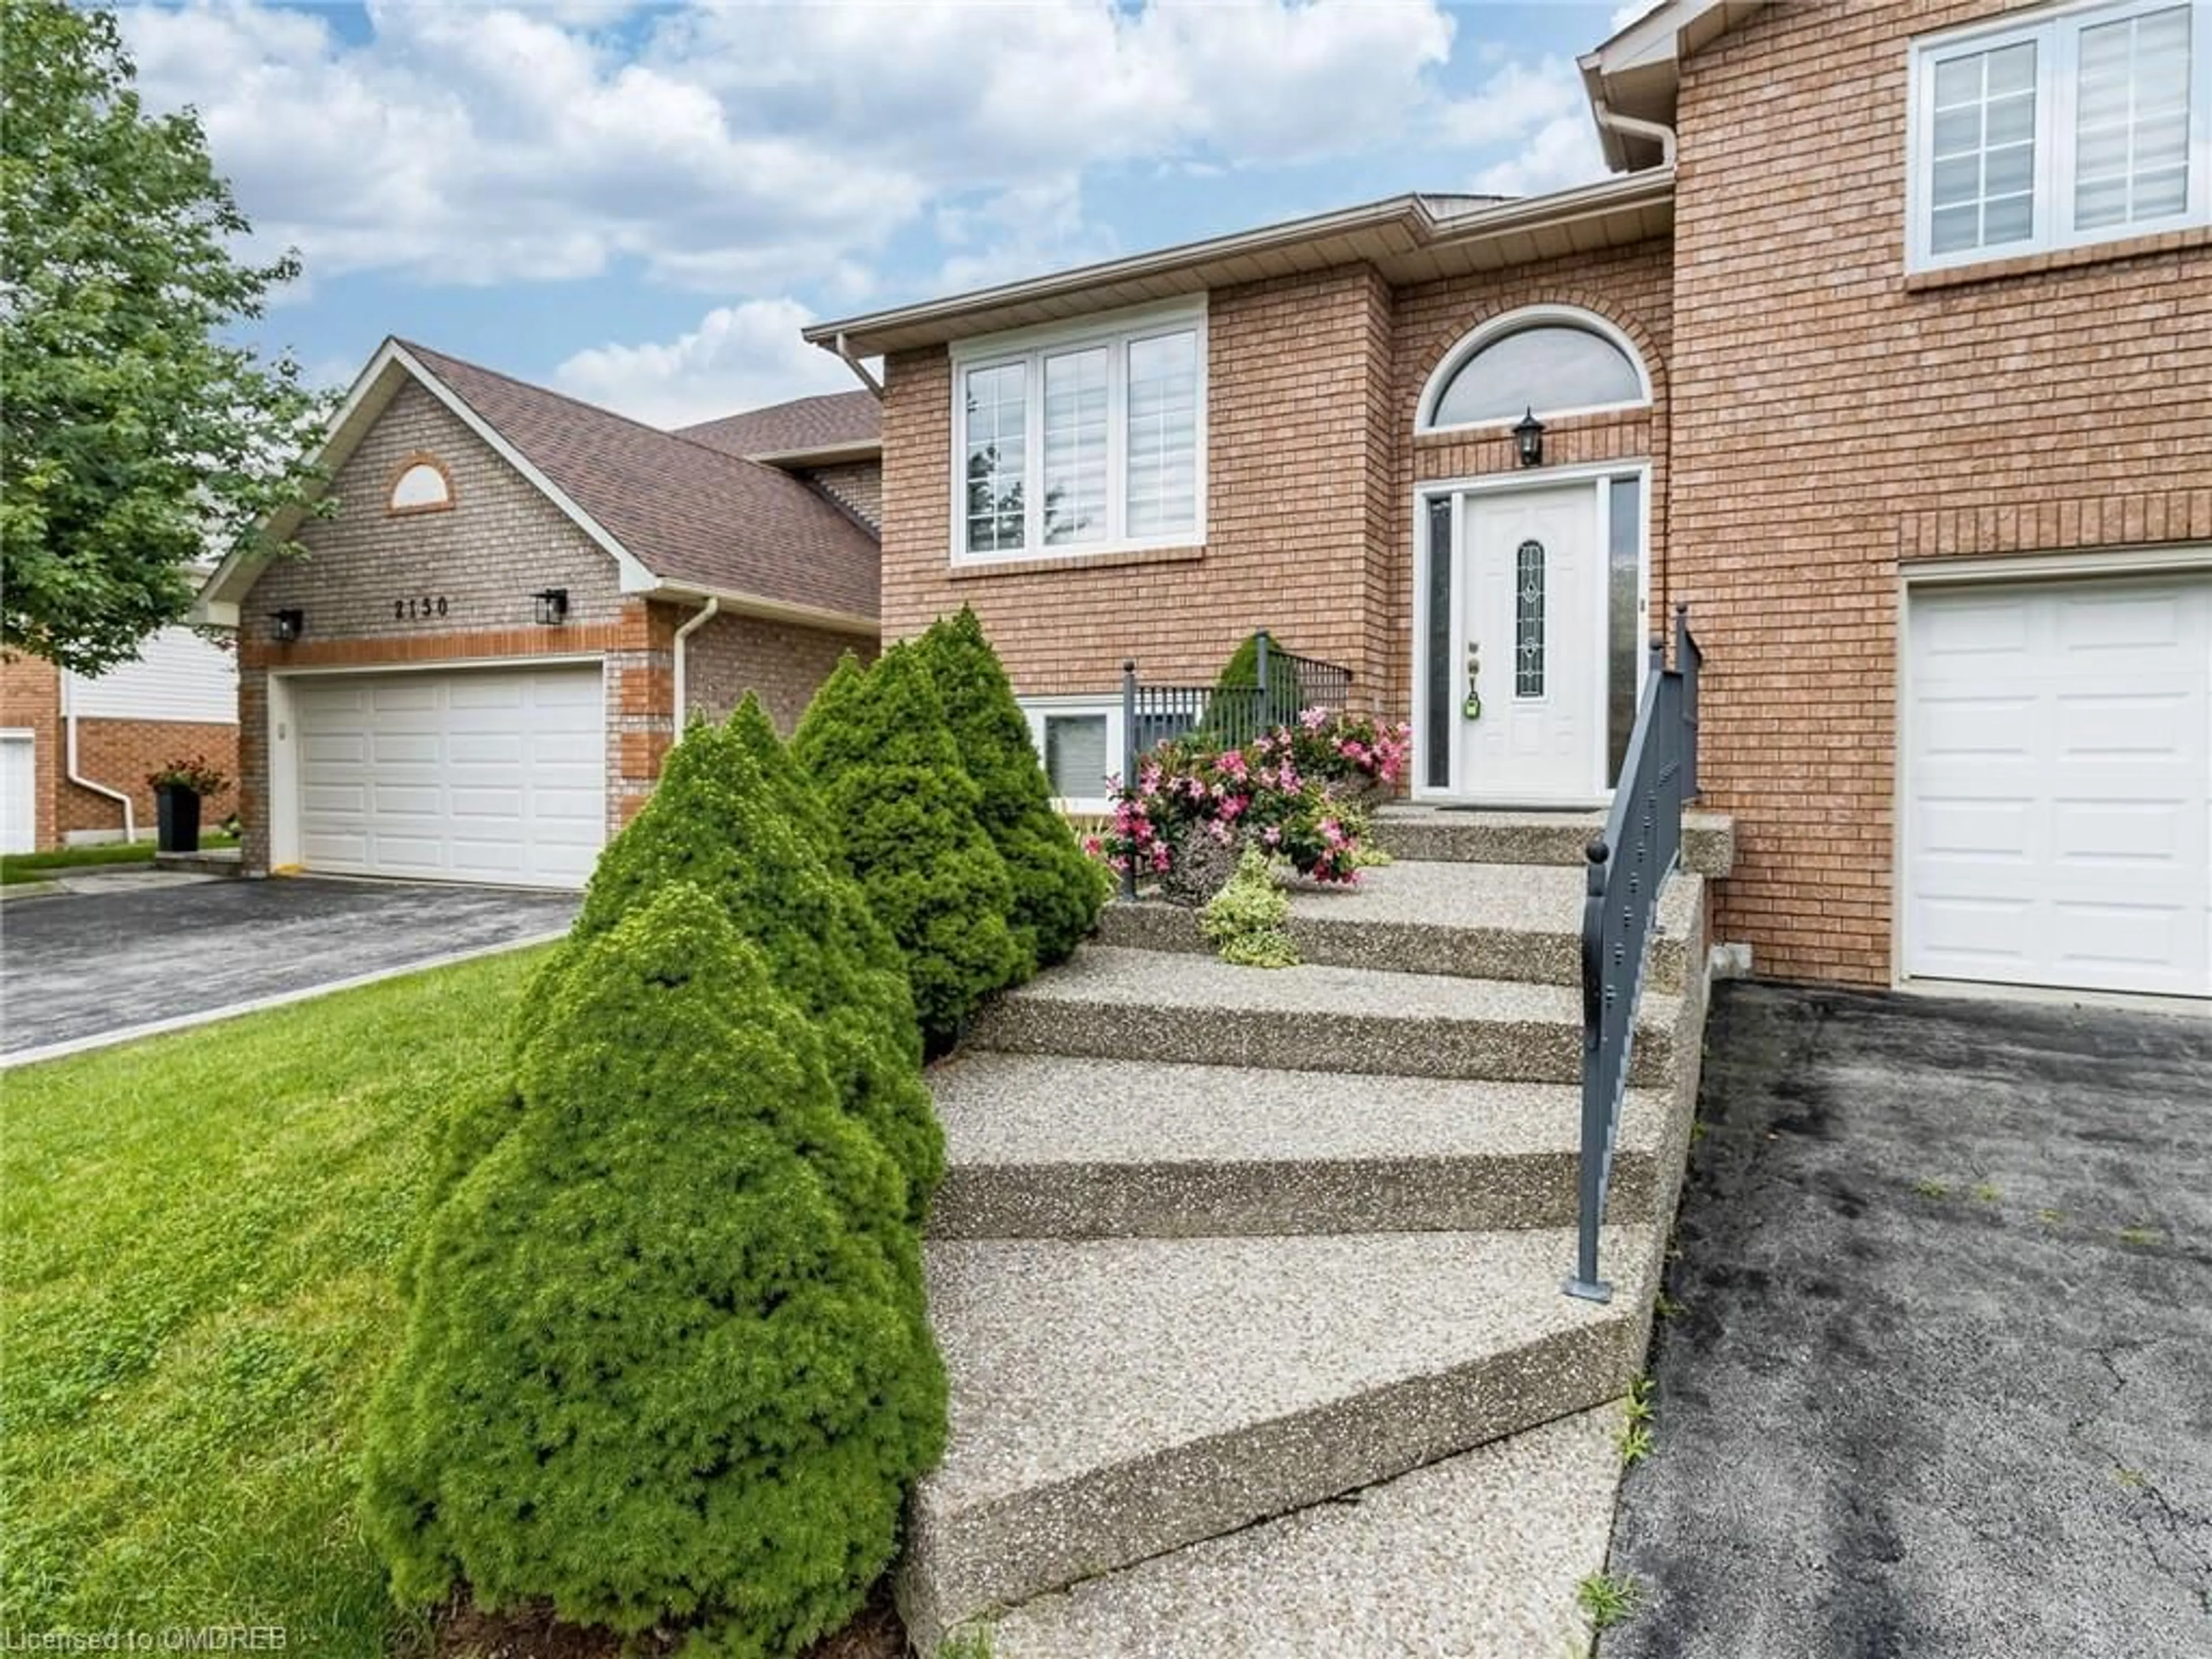 Frontside or backside of a home for 2152 Cleaver Ave, Burlington Ontario L7M 3W3